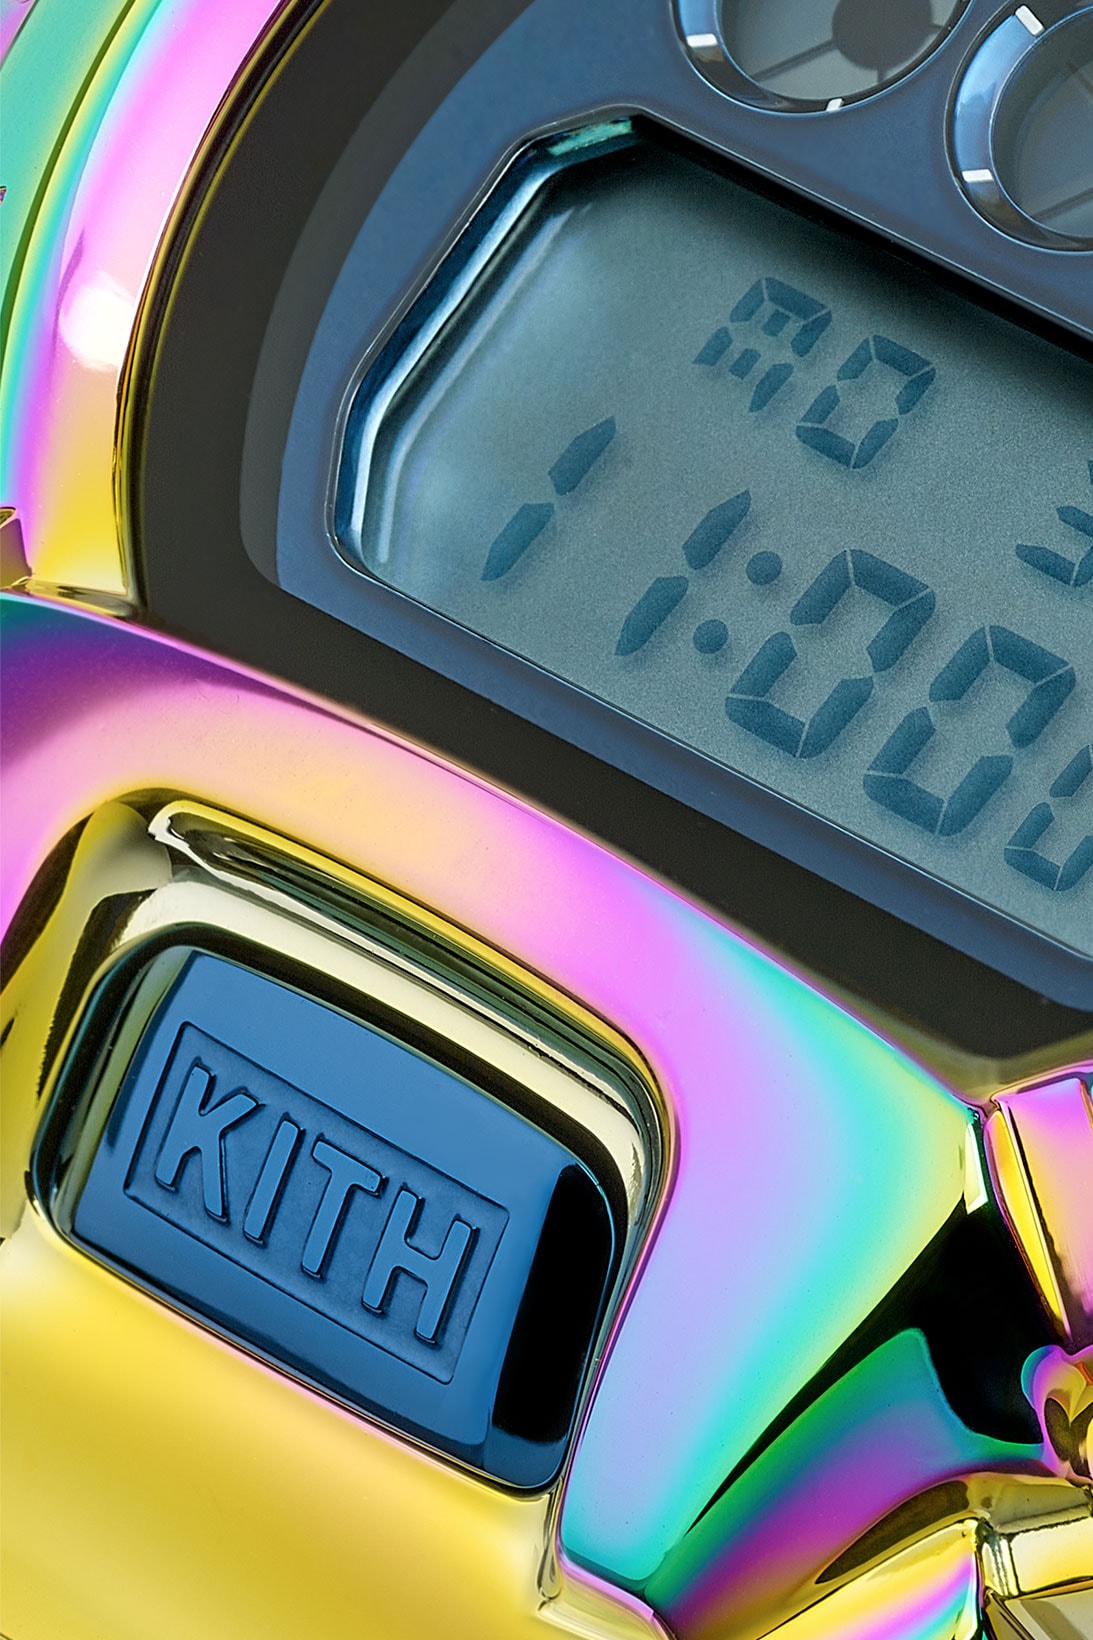 kith g-shock gm-6900 rainbow watches collaboration face details digital